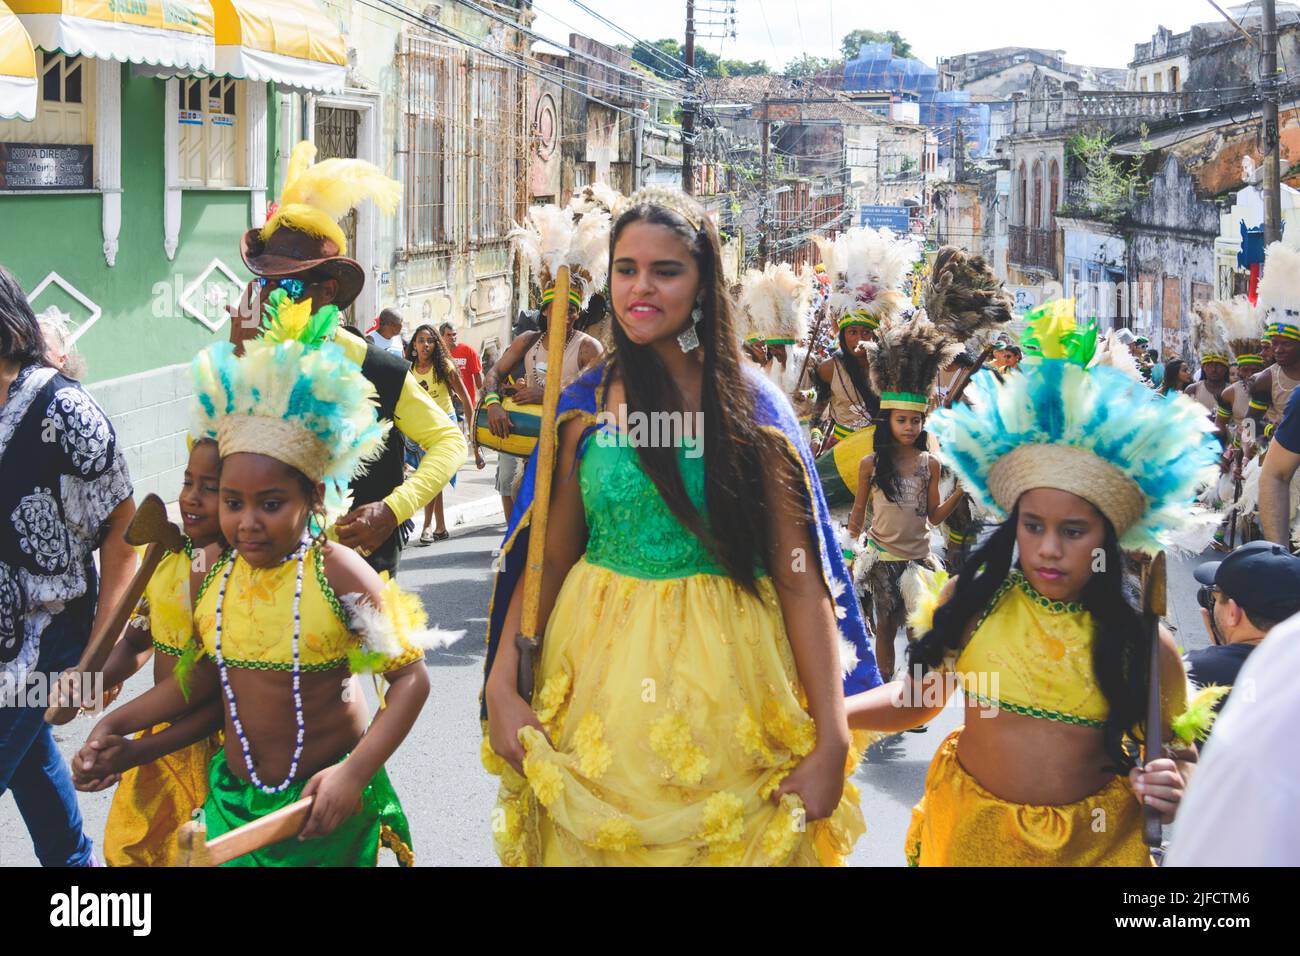 Salvador, Bahia, Brazil - July 02, 2017: Indigenous peoples participate protesting in the Dois de Julho cultural parade in Lapinha neighborhood in Sal Stock Photo